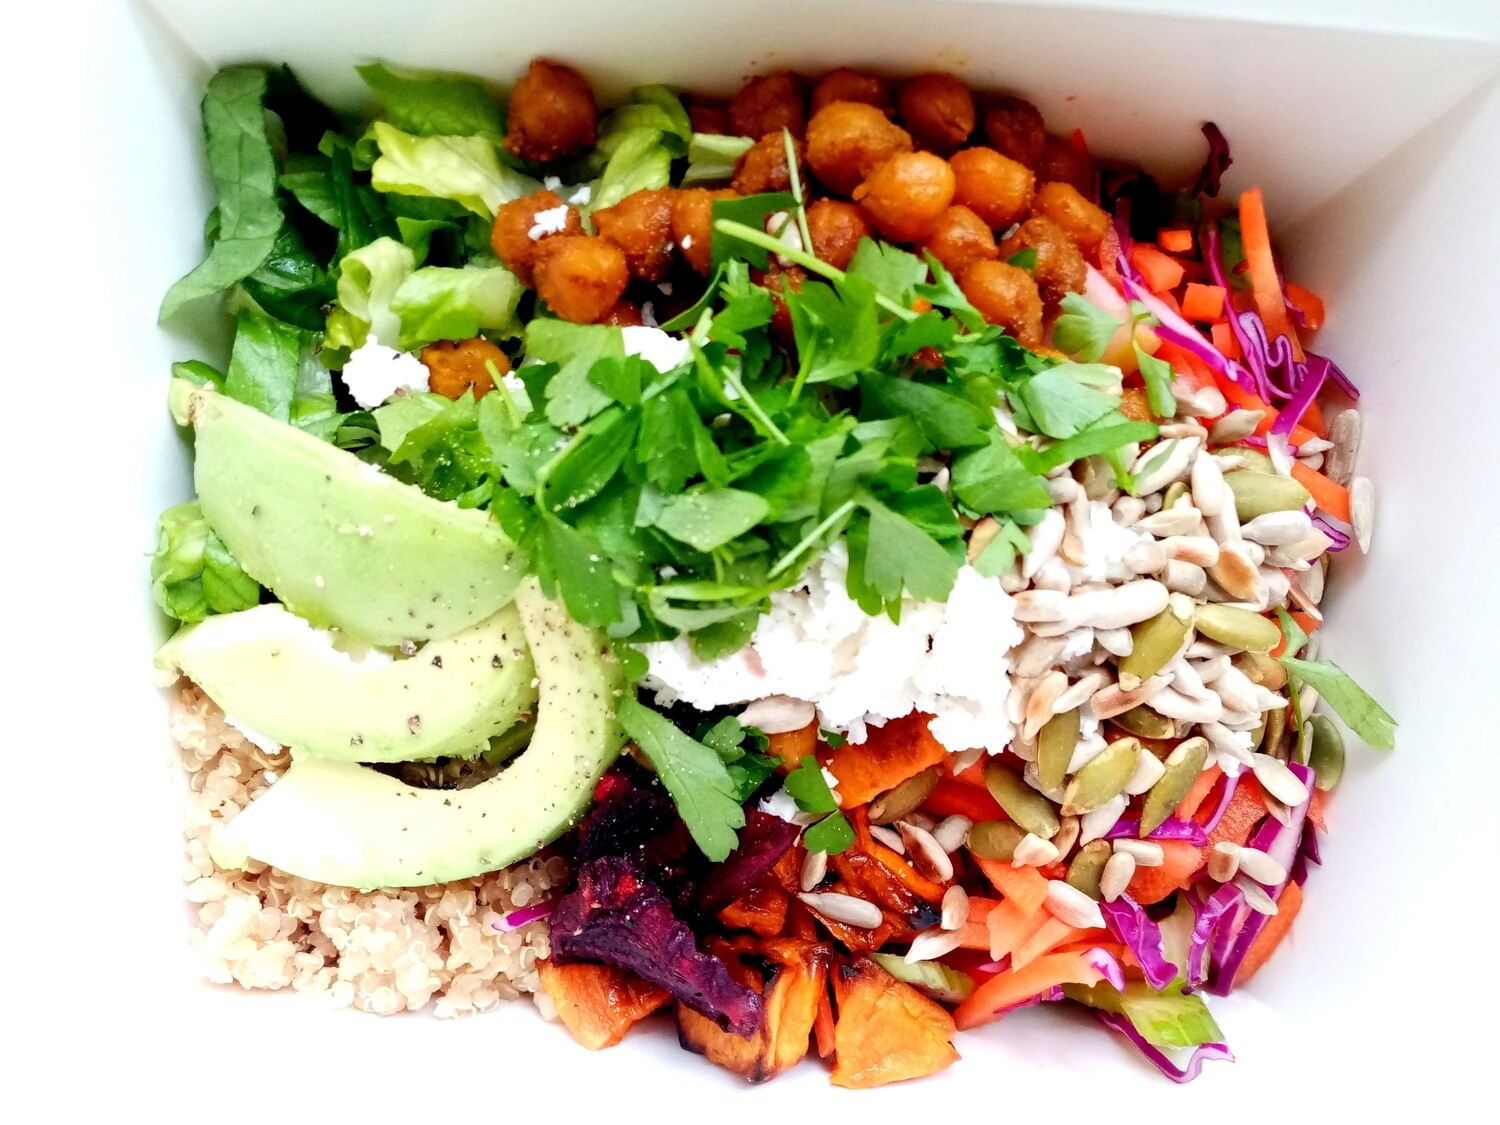 'TAKAKA BOX ' apple, grated carrot, celery, red cabbage, honey-curry roasted chickpeas, toasted seeds, avocado, salad greens, fresh herbs. Your choice extras & vinaigrette GF/DF